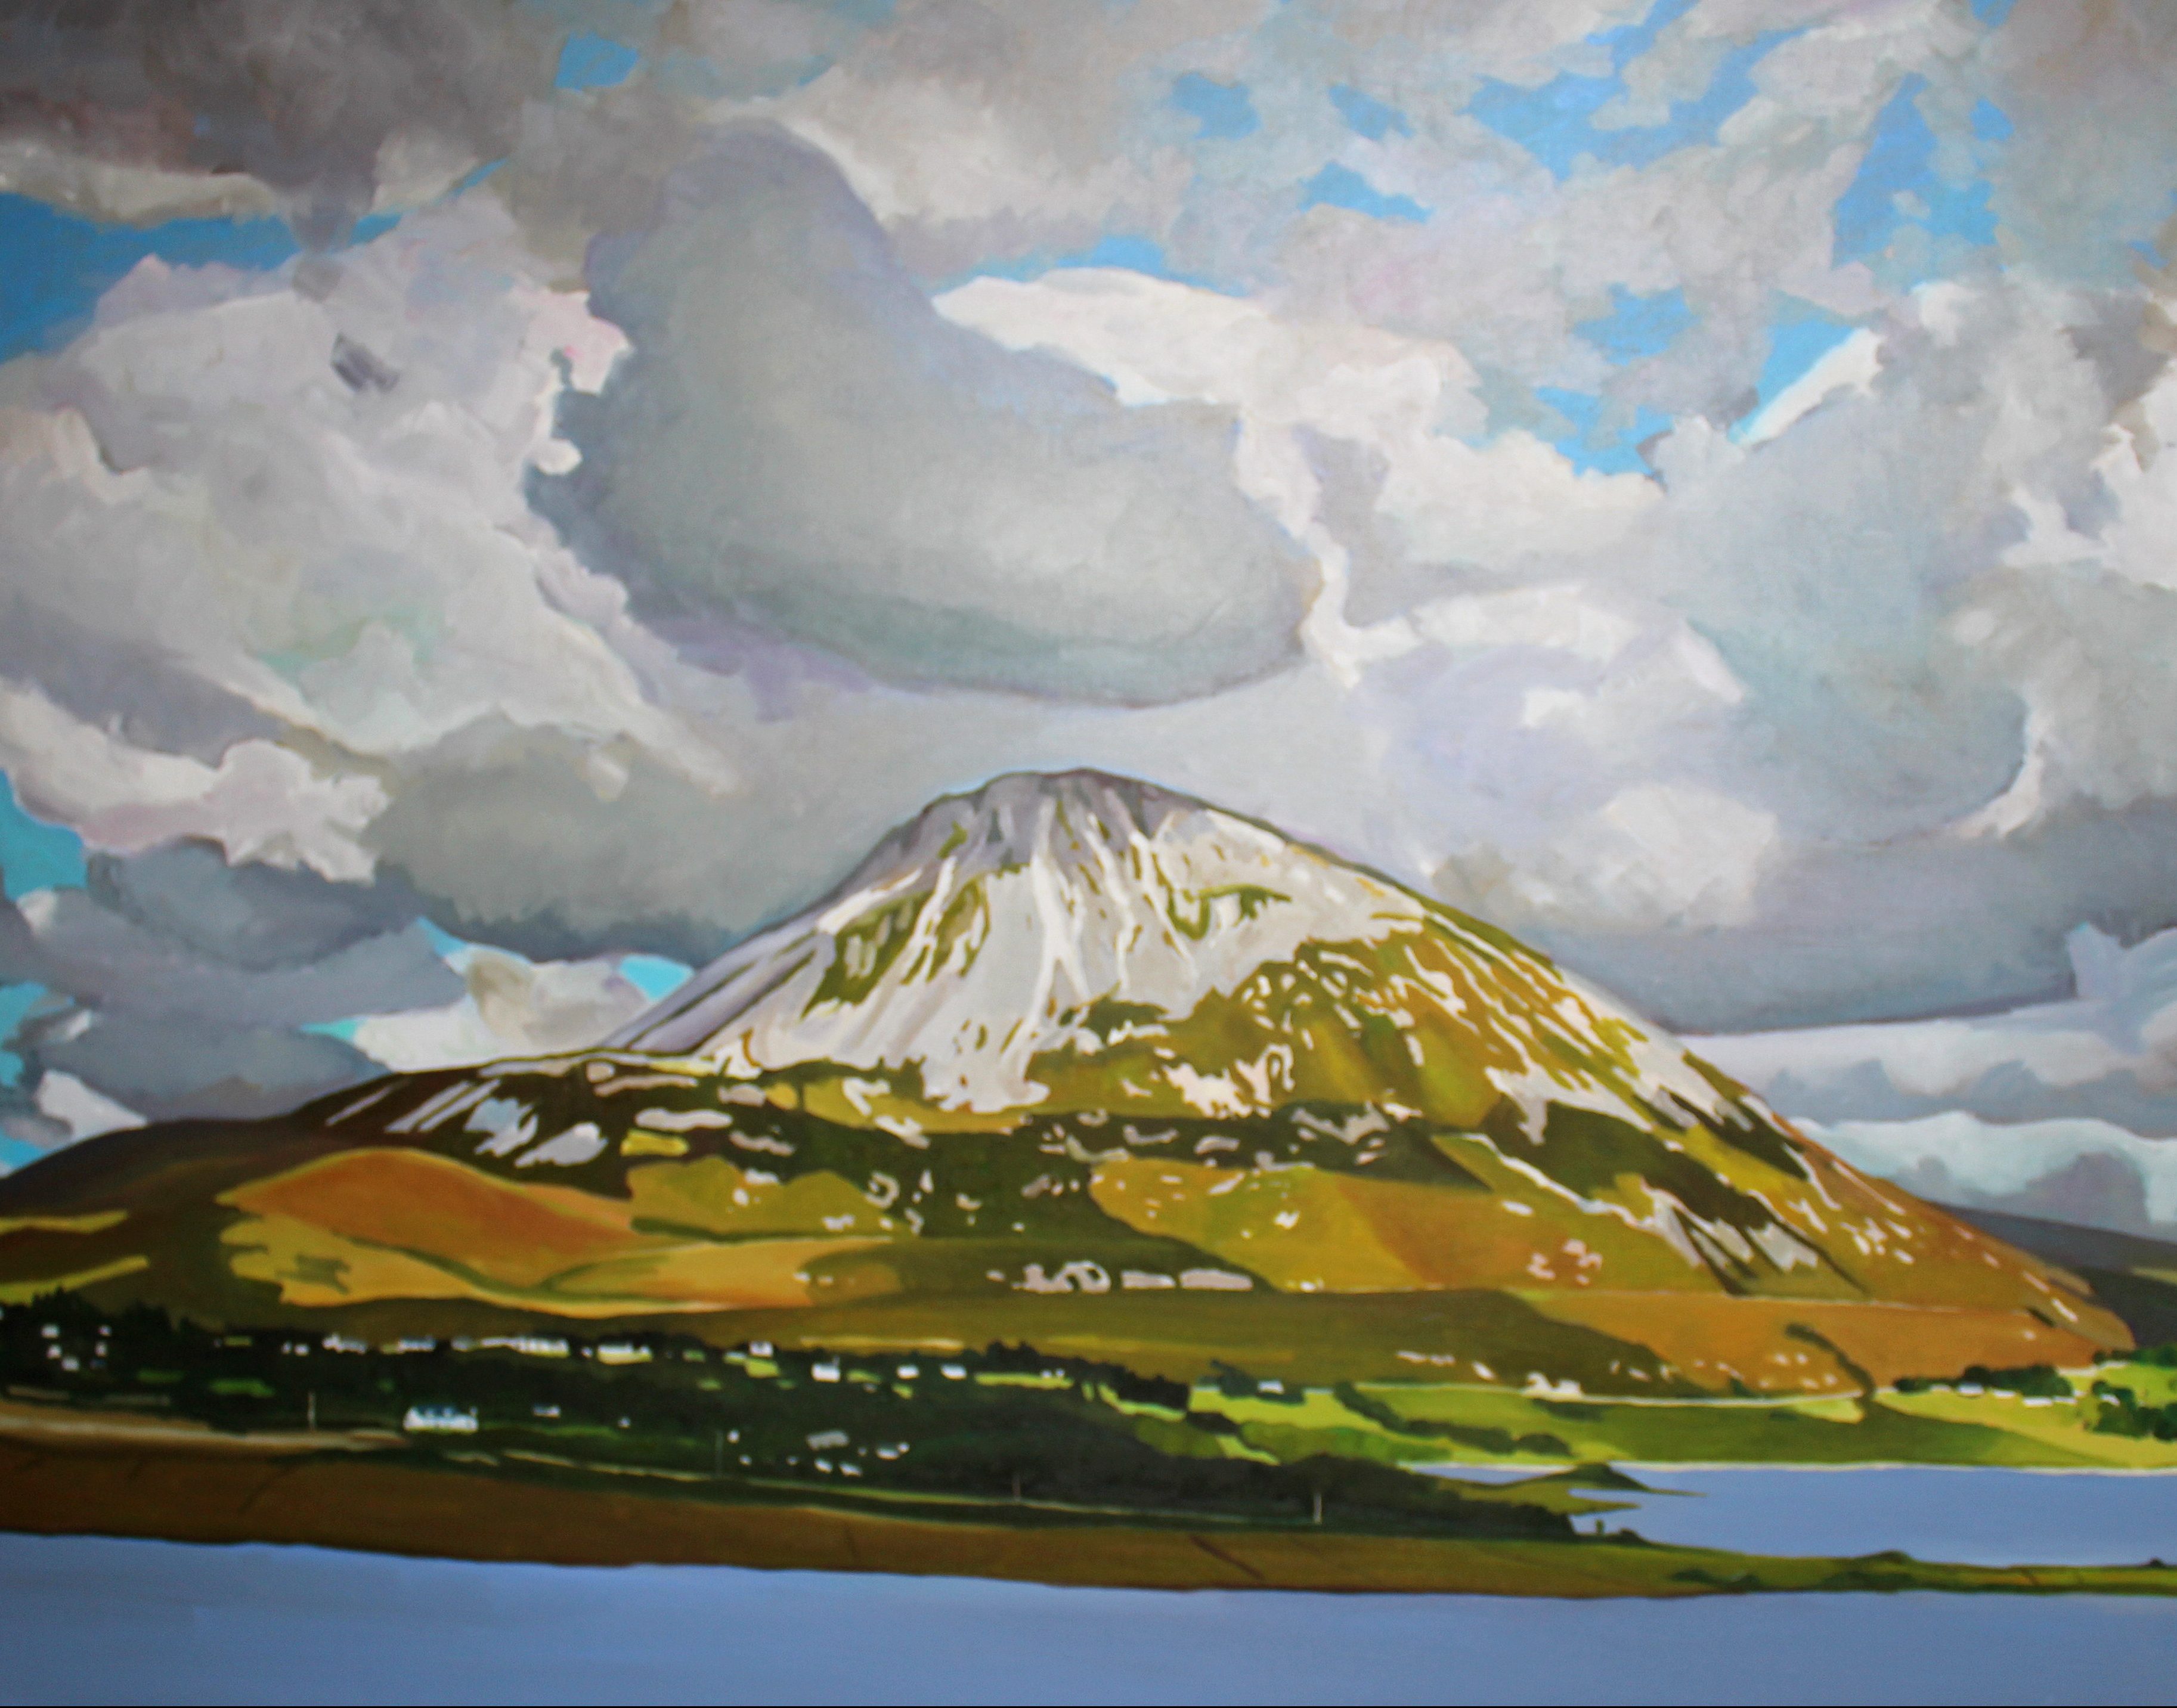 Painting of Donegal Errigal